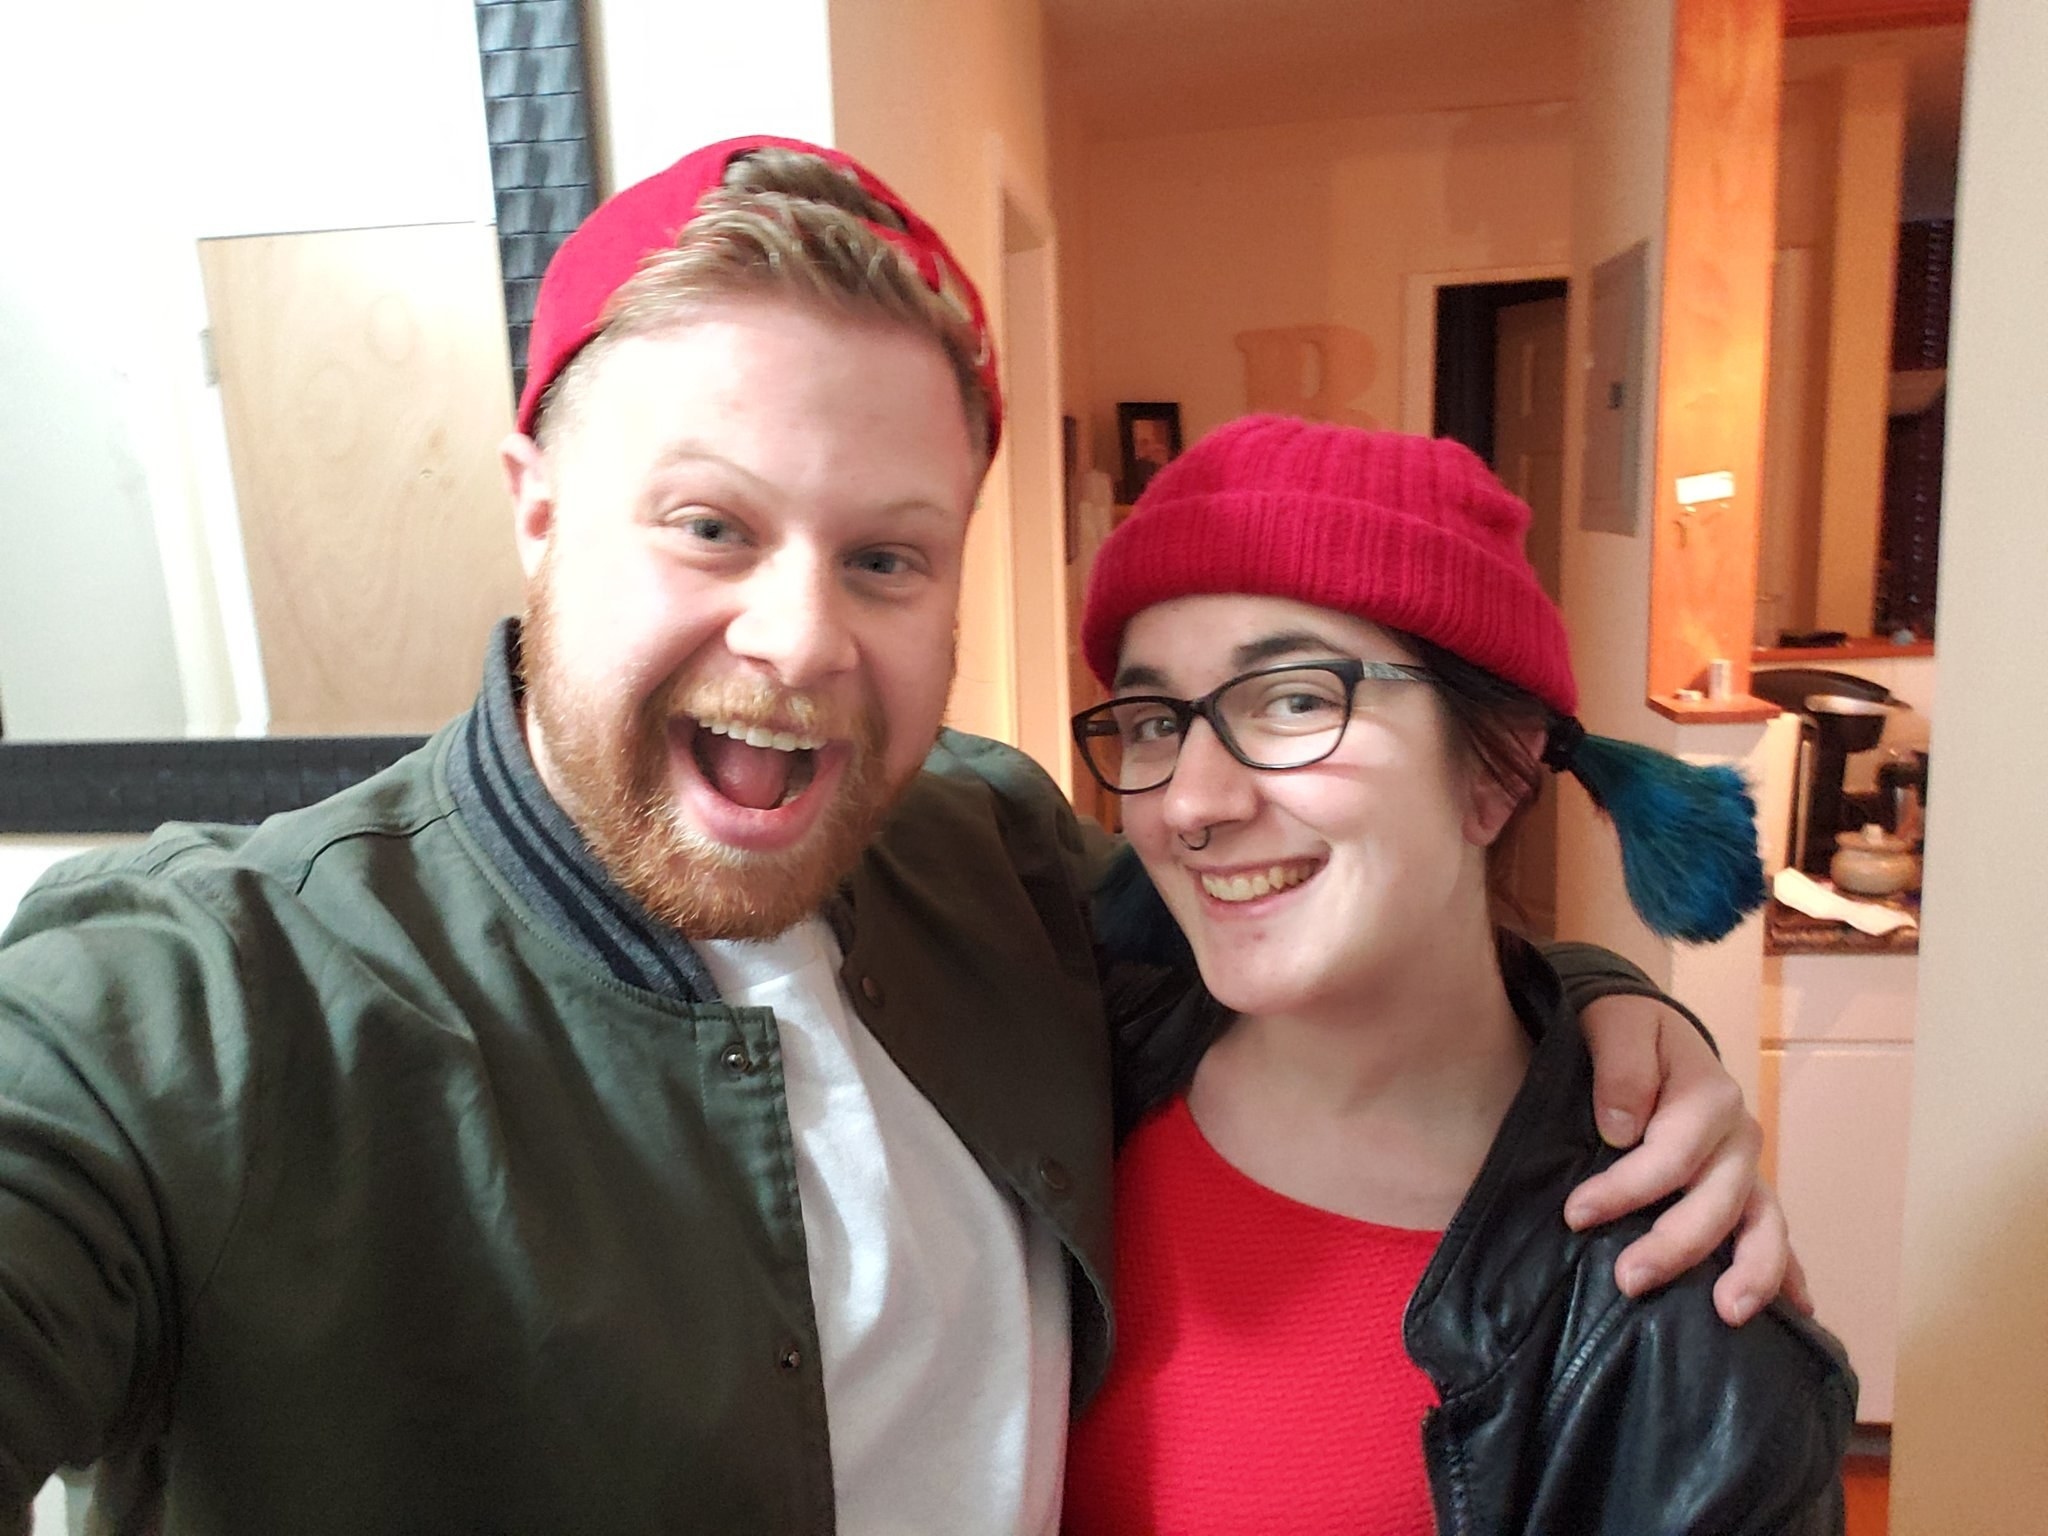 These A-plus T.J. Detweiler and Ashley Spinelli costumes from Recess. 